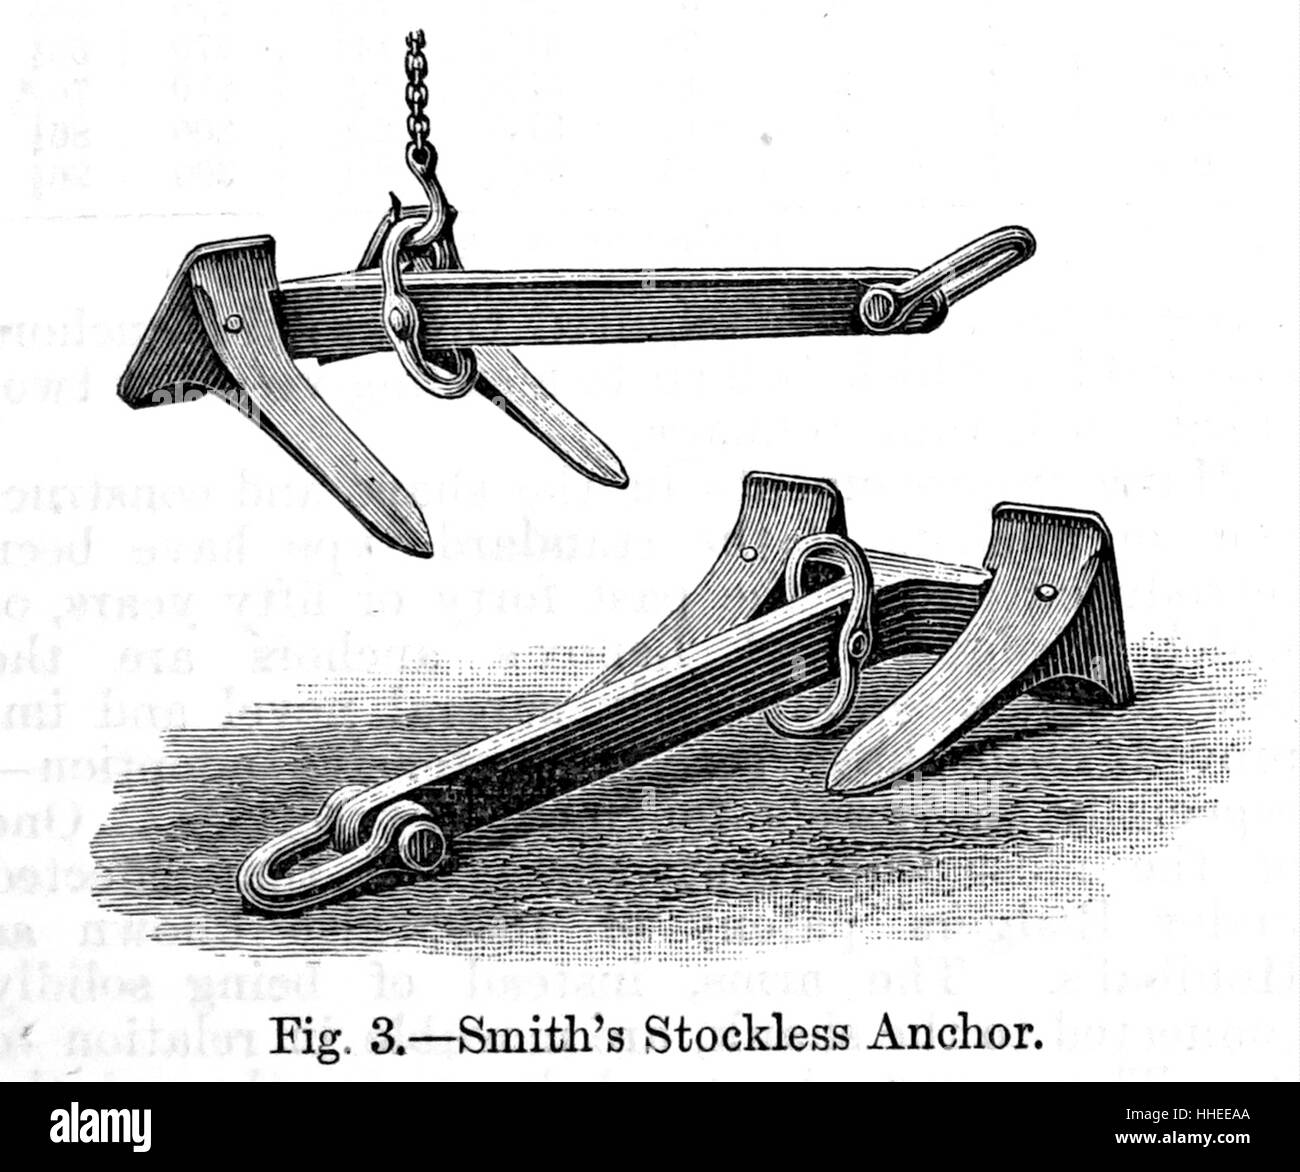 Engraving of a Smith's Stockless anchor, a device used to connect